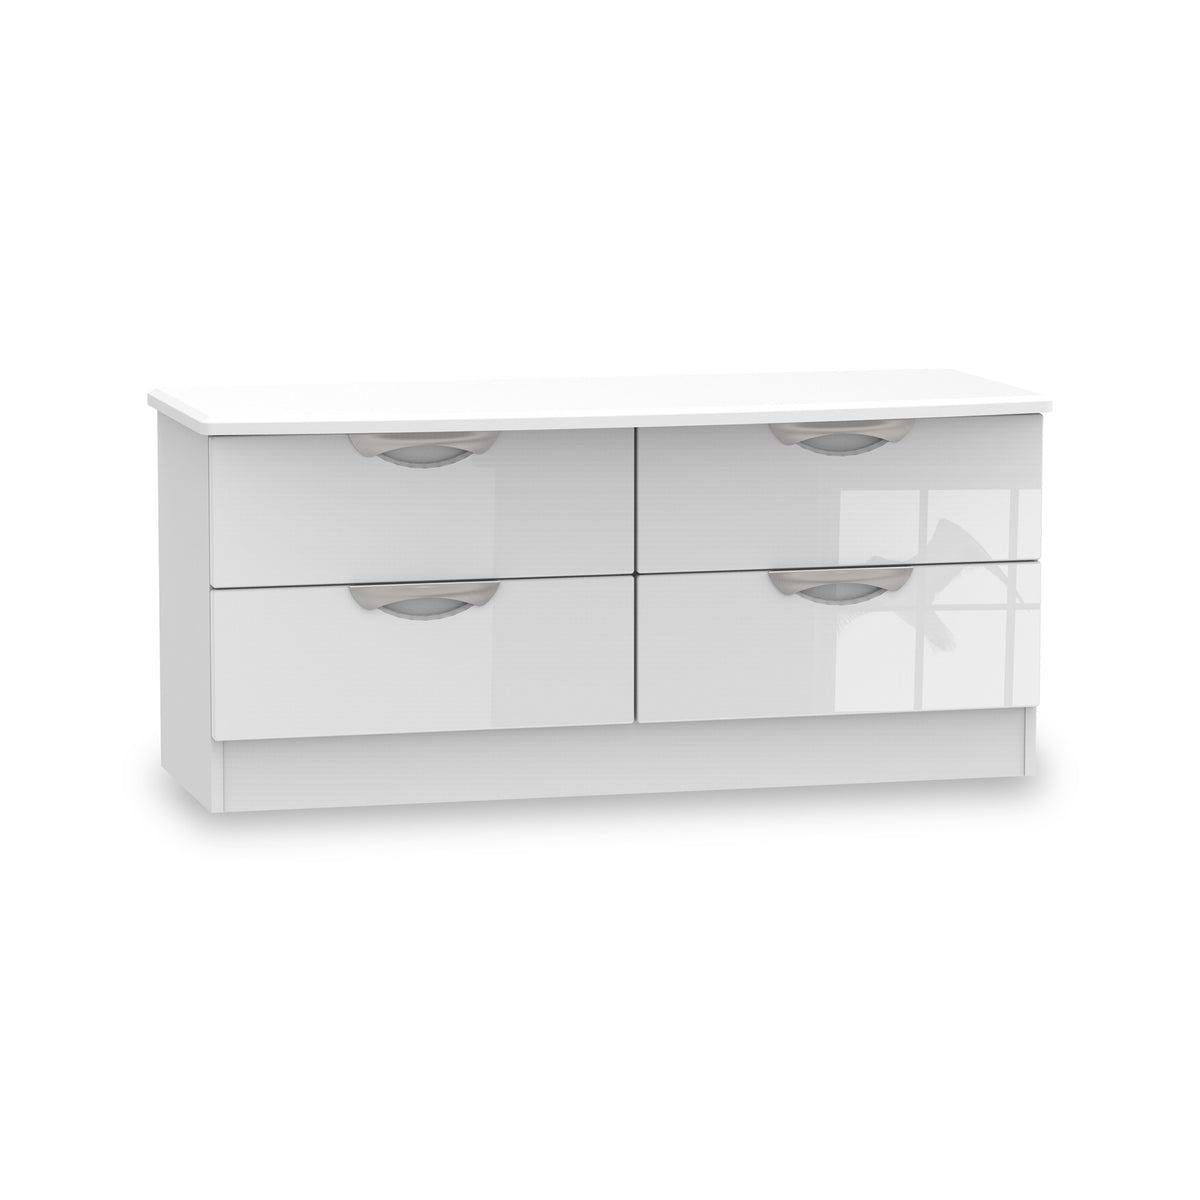 Beckett White Gloss 4 Drawer Low Storage Unit from Roseland